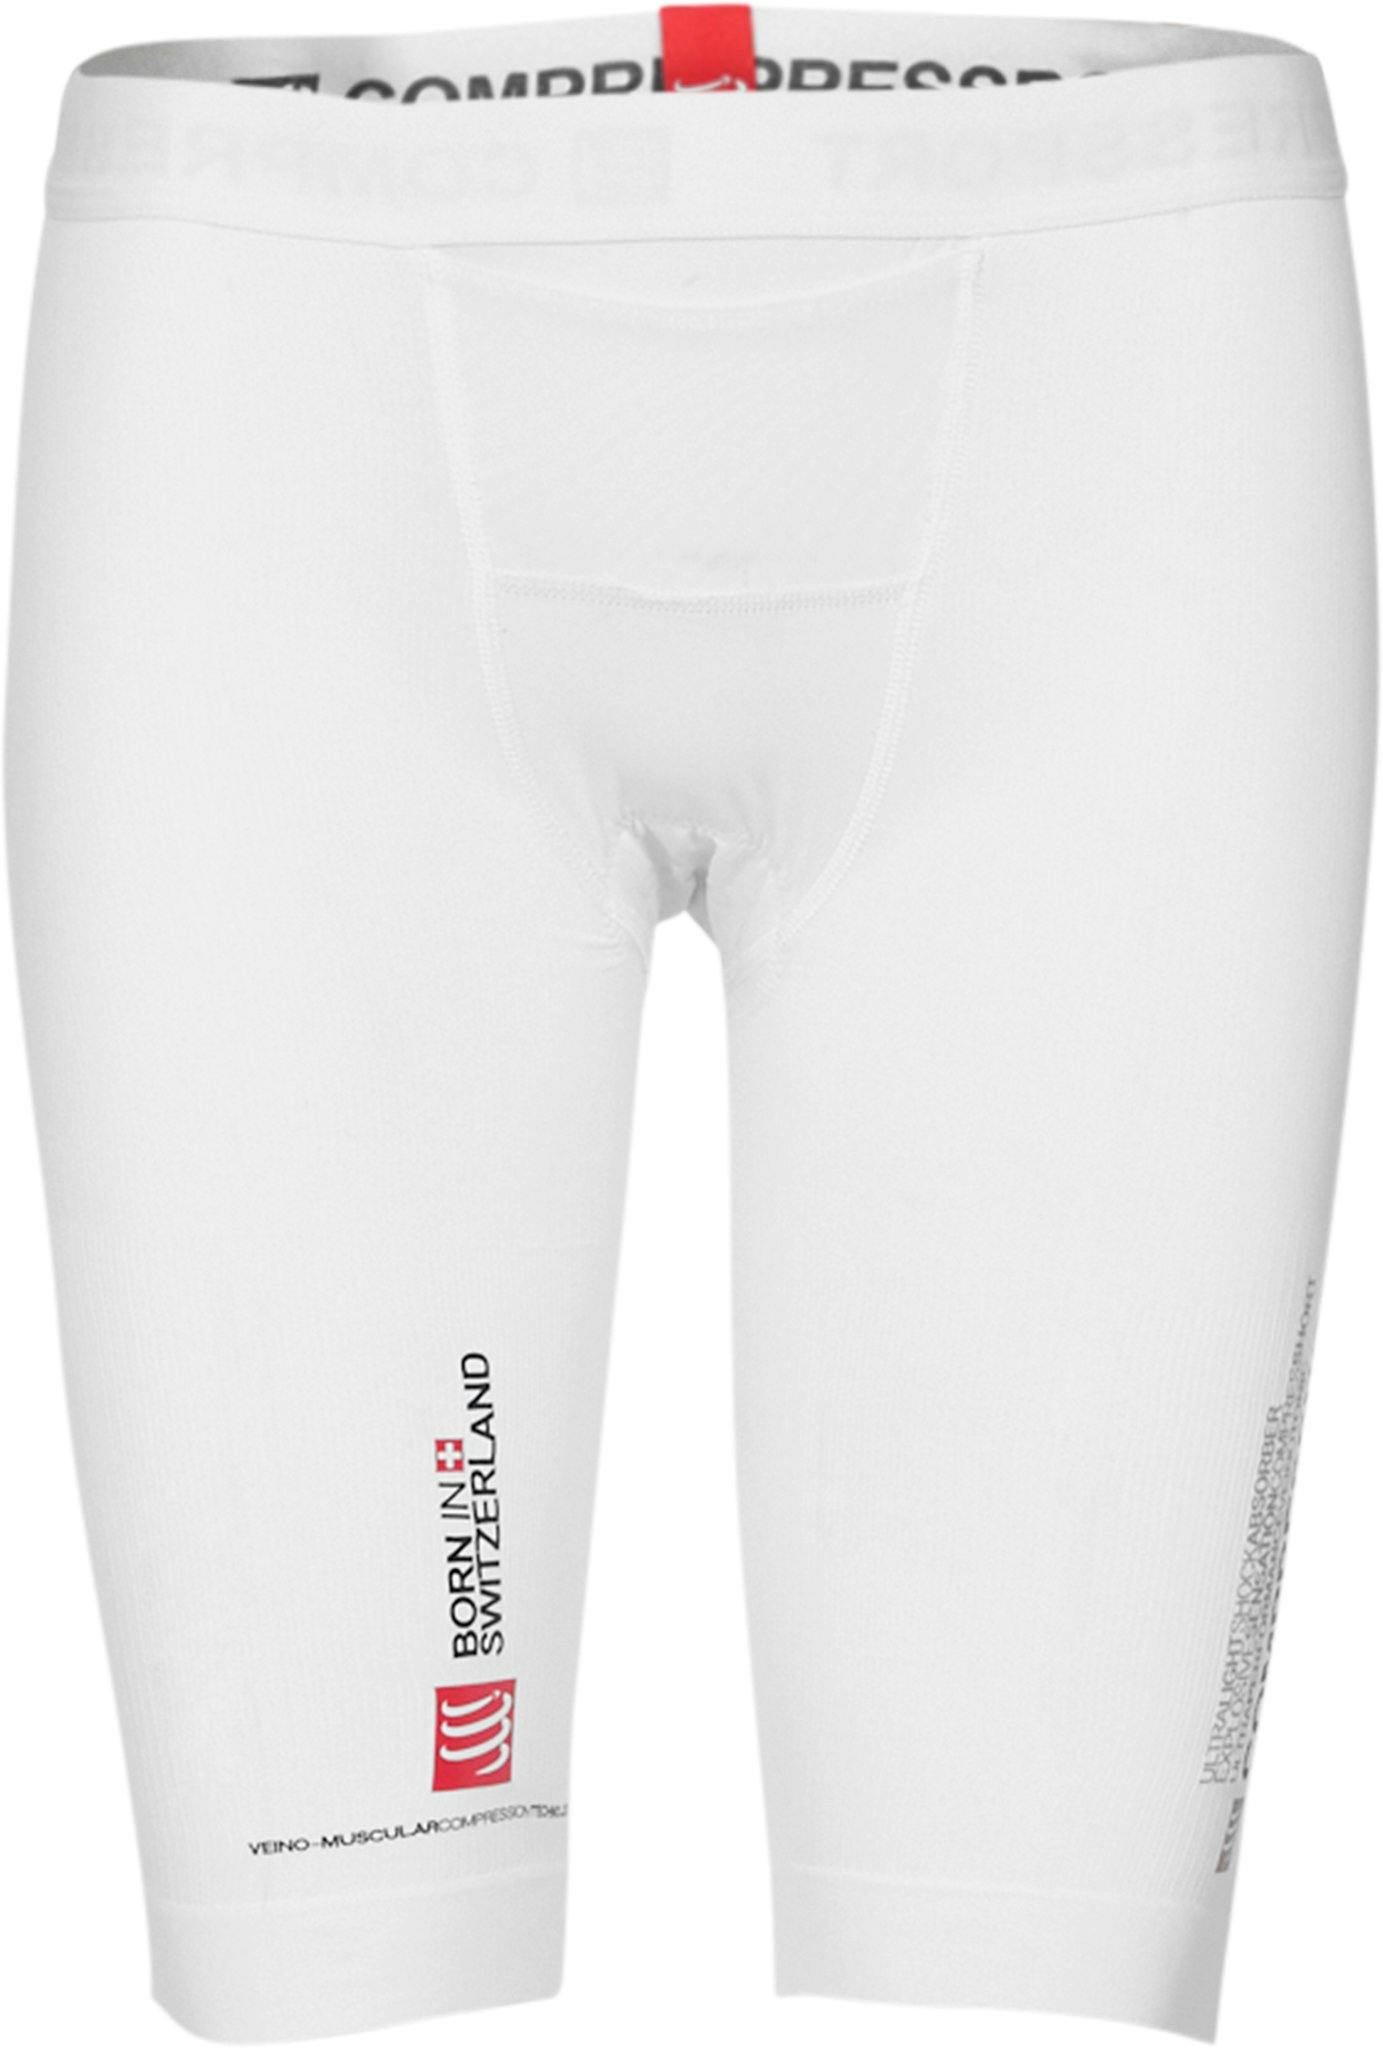 Product image for High Performance Triathlon Compression Shorts - Unisex